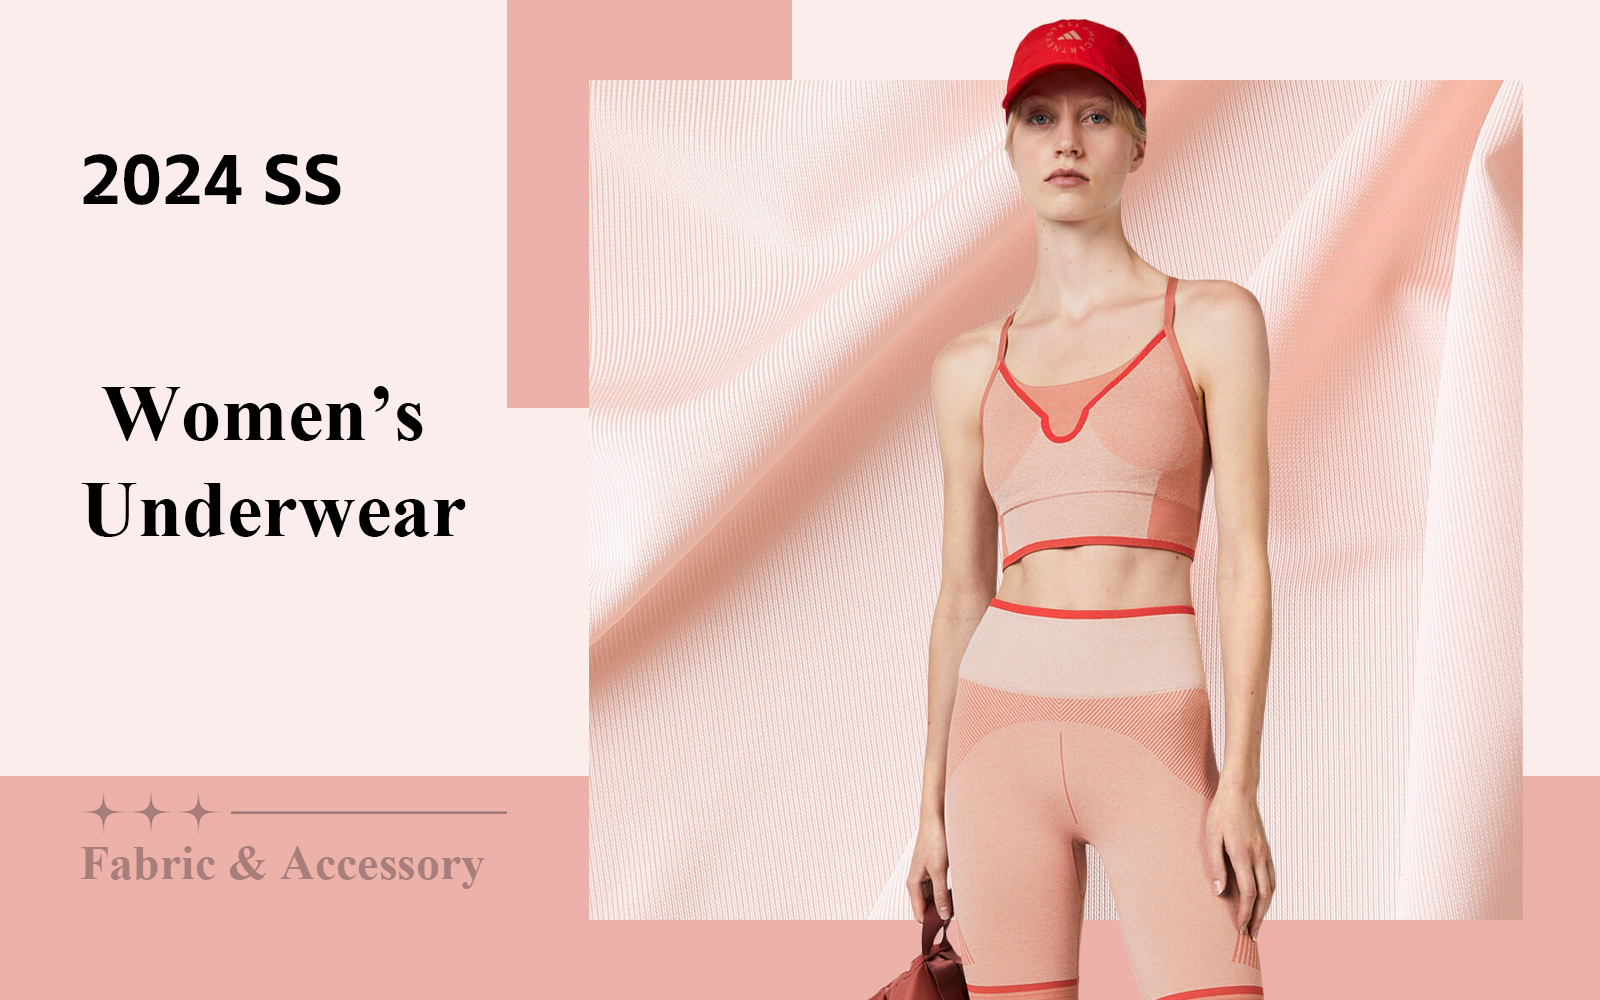 Protective Performance -- The Fabric Trend for Women's Underwear